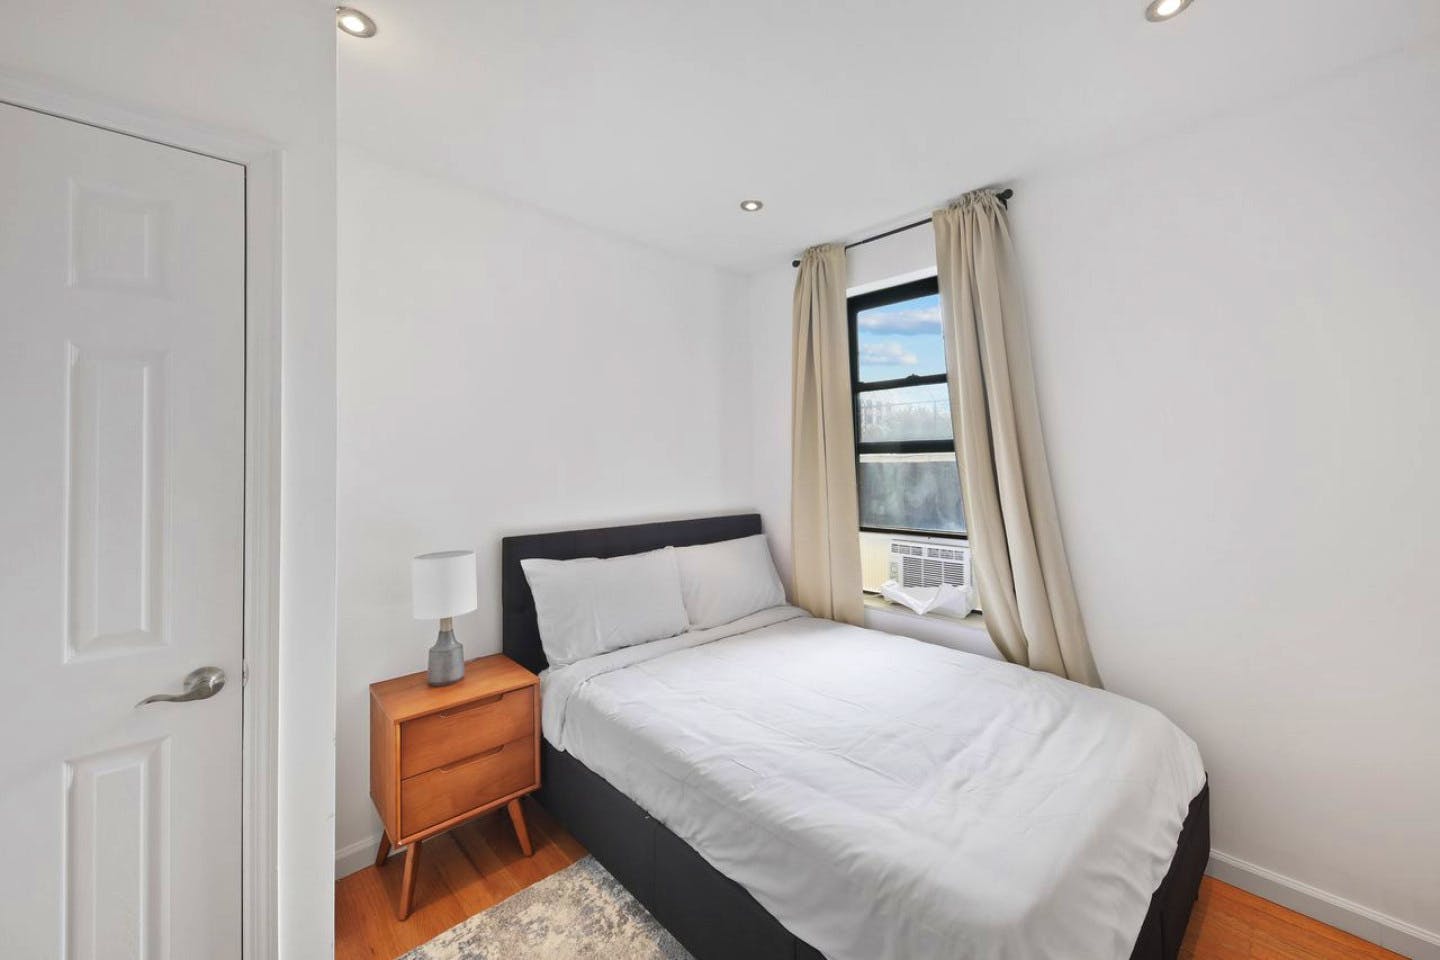 Exceptional Stunning Apt. near Morningside Park and Columbia University